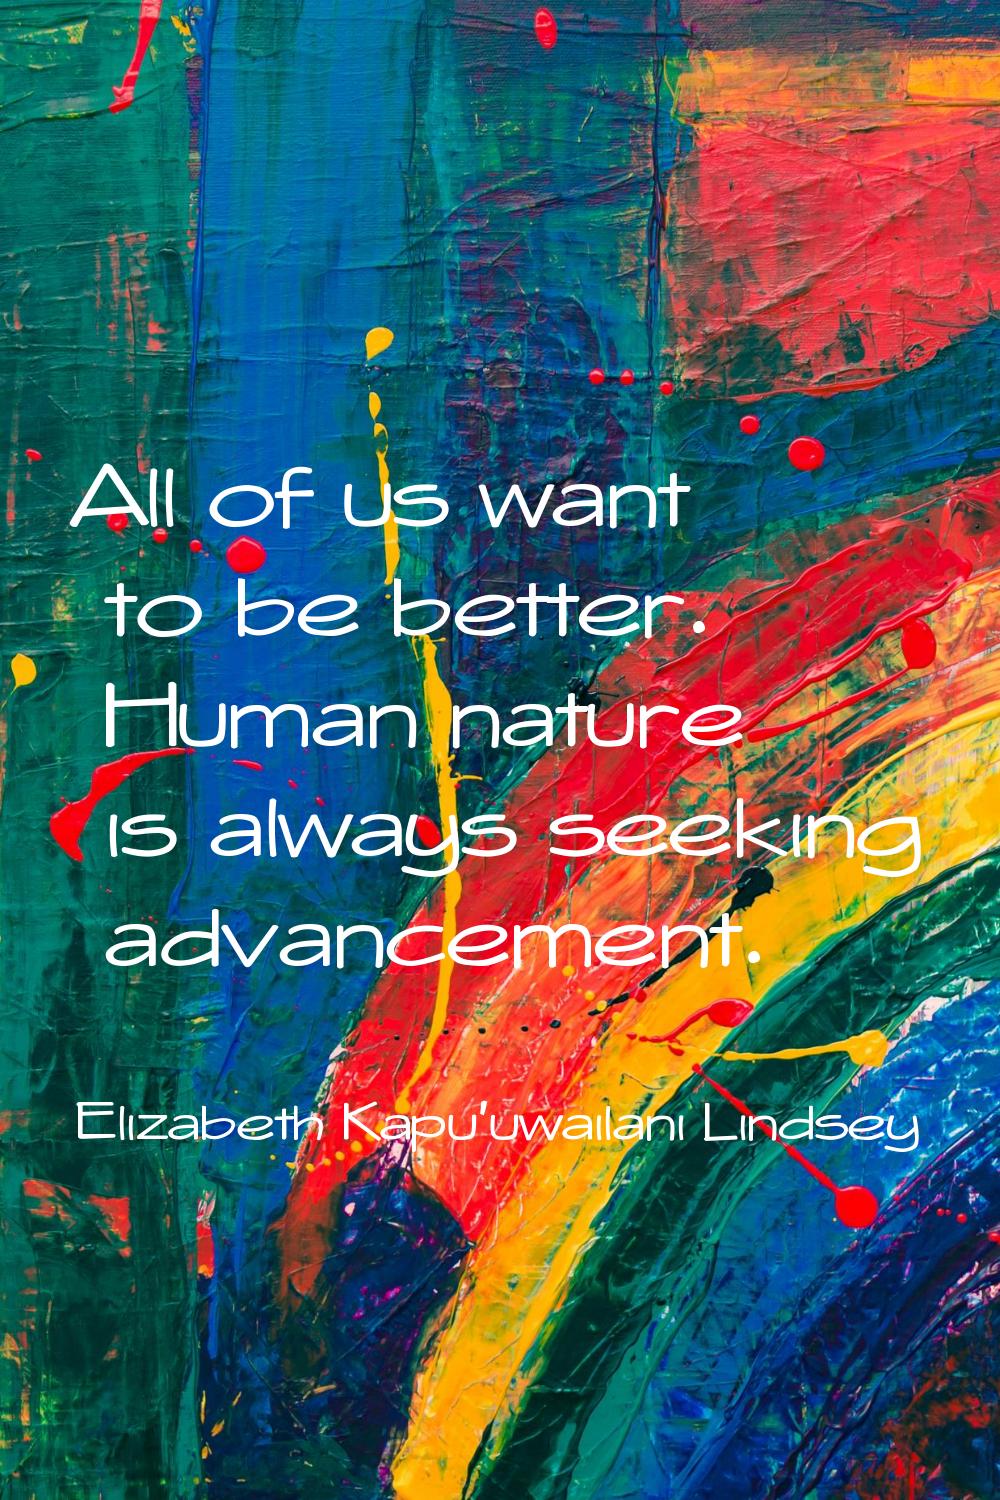 All of us want to be better. Human nature is always seeking advancement.